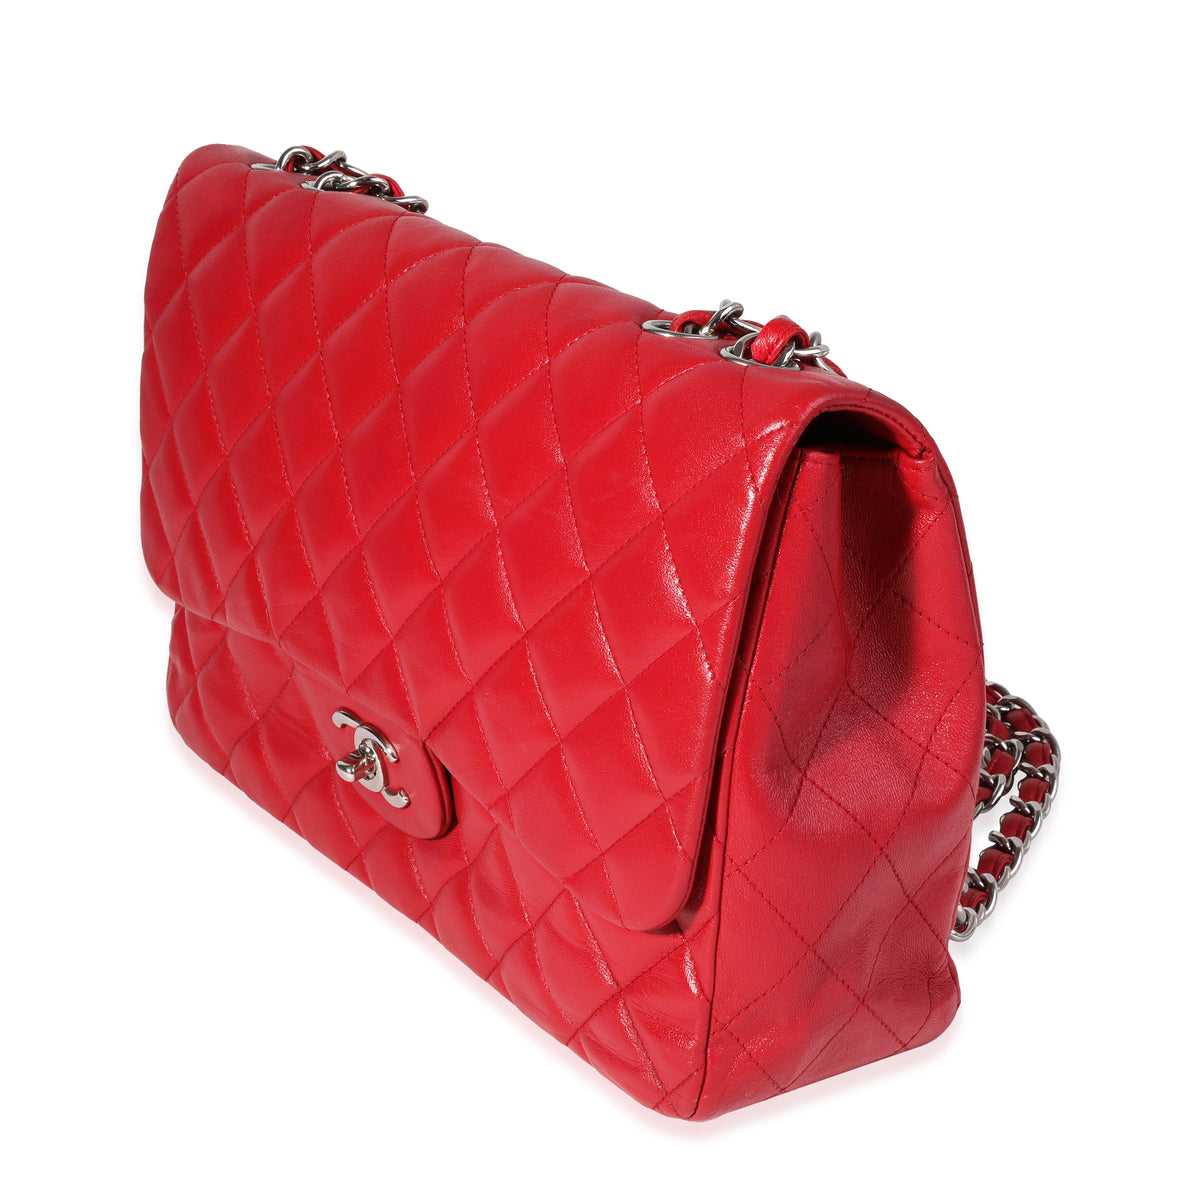 Chanel Red Quilted Lambskin Jumbo Classic Single Flap Bag